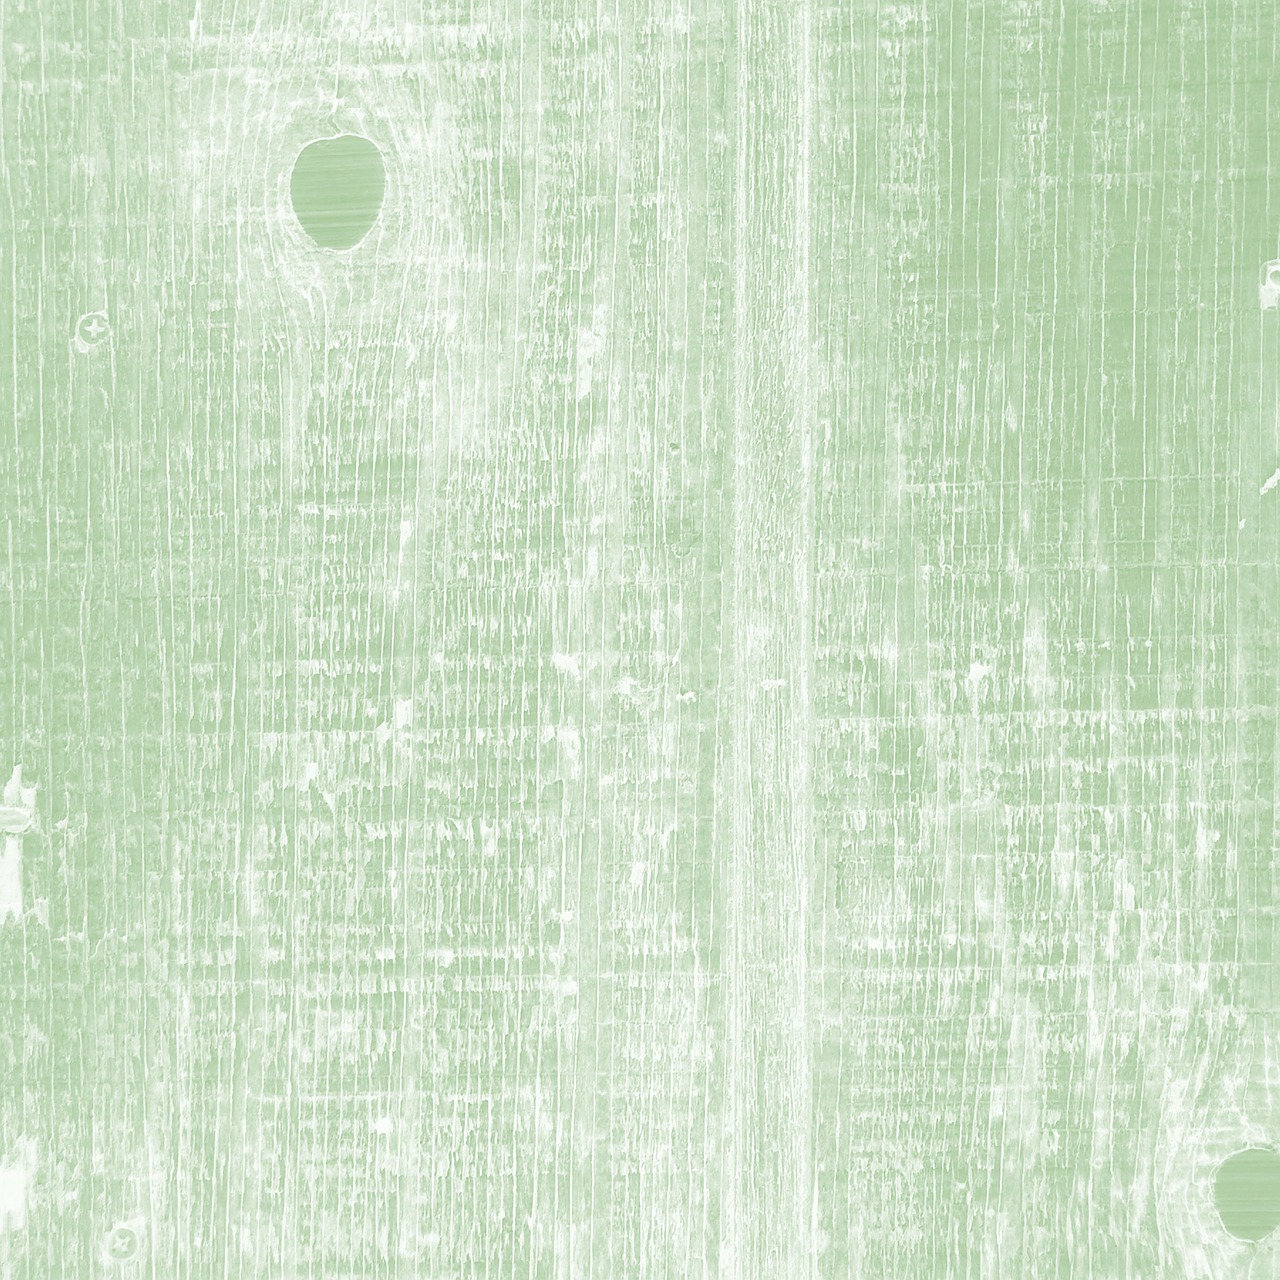 green wooden textures free photo